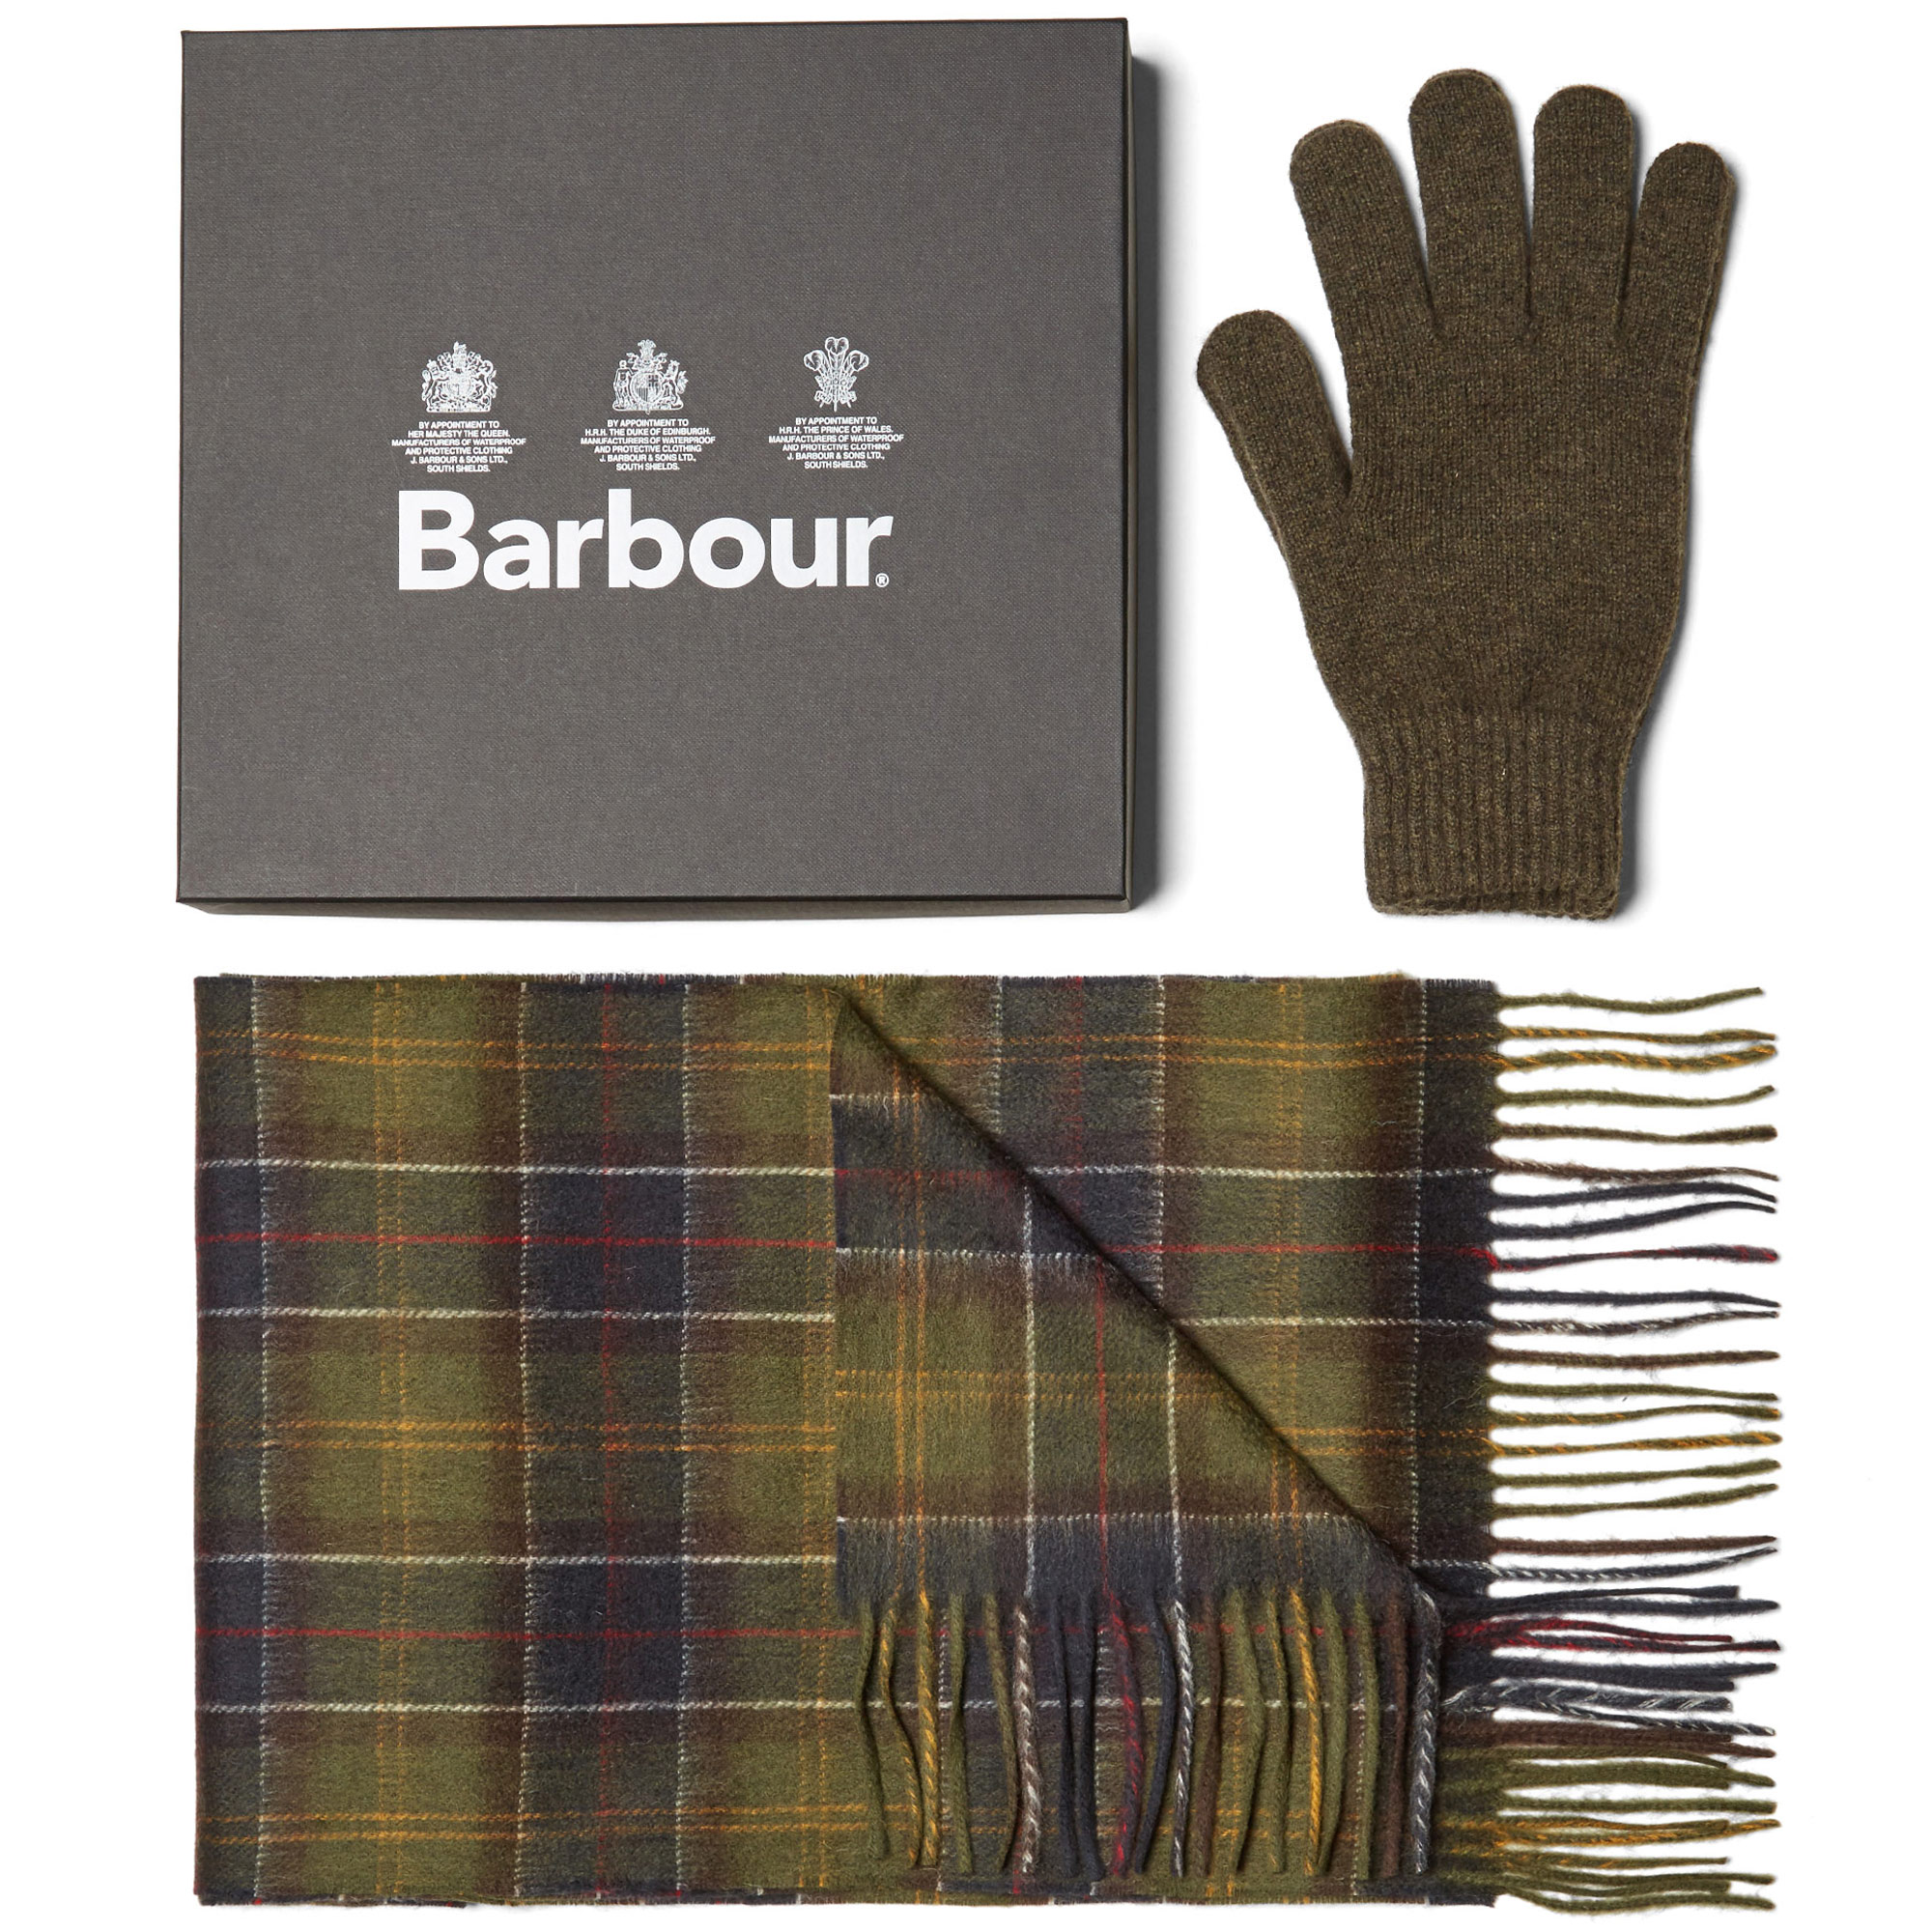 Barbour Scarf & Glove Gift Box